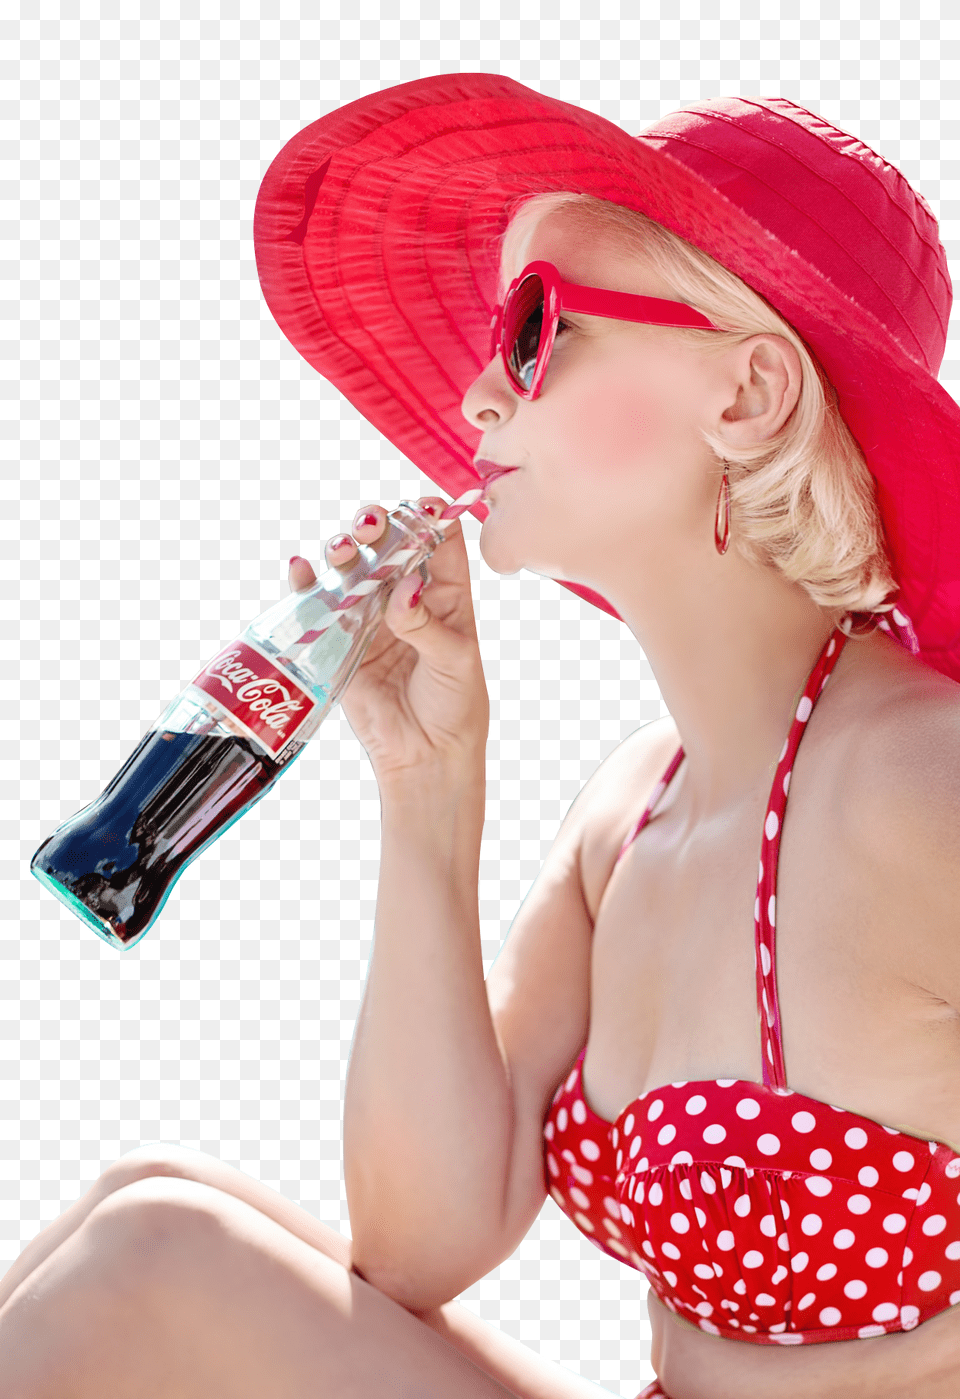 Pngpix Com Sexy Woman Drinking Coca Cola Drink Image, Clothing, Hat, Adult, Swimwear Free Png Download